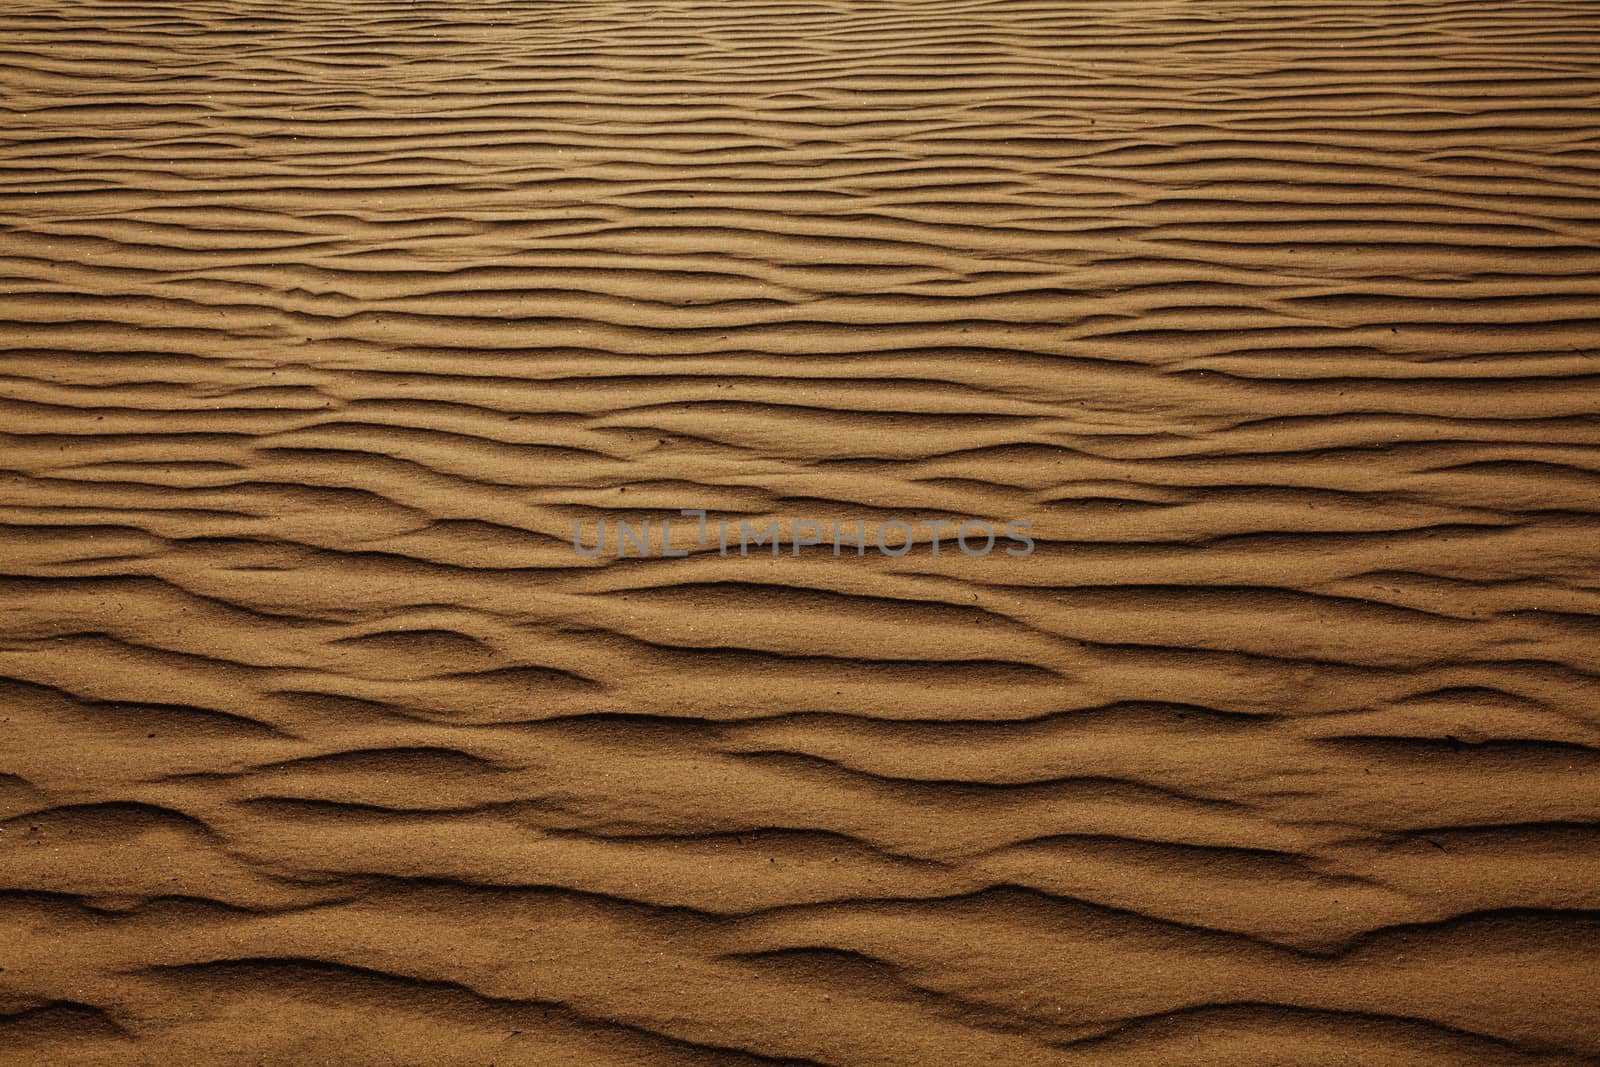 Texture background of wind pattern on sand dunes, full frame